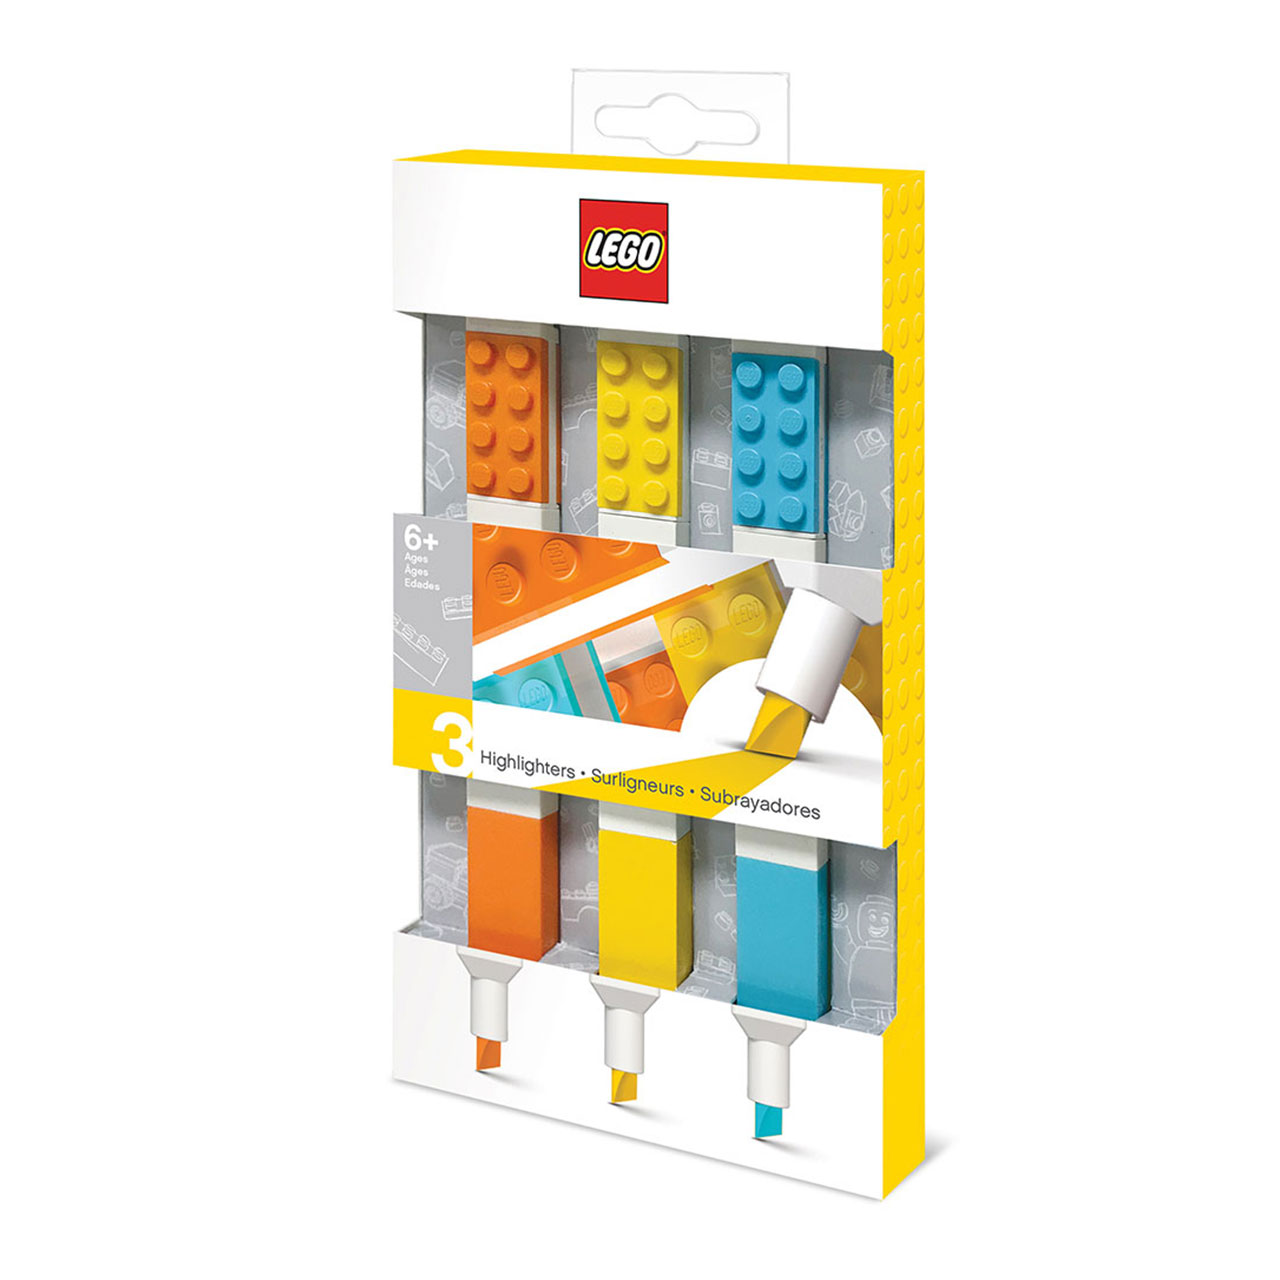 Lego 2.0 Highlighters